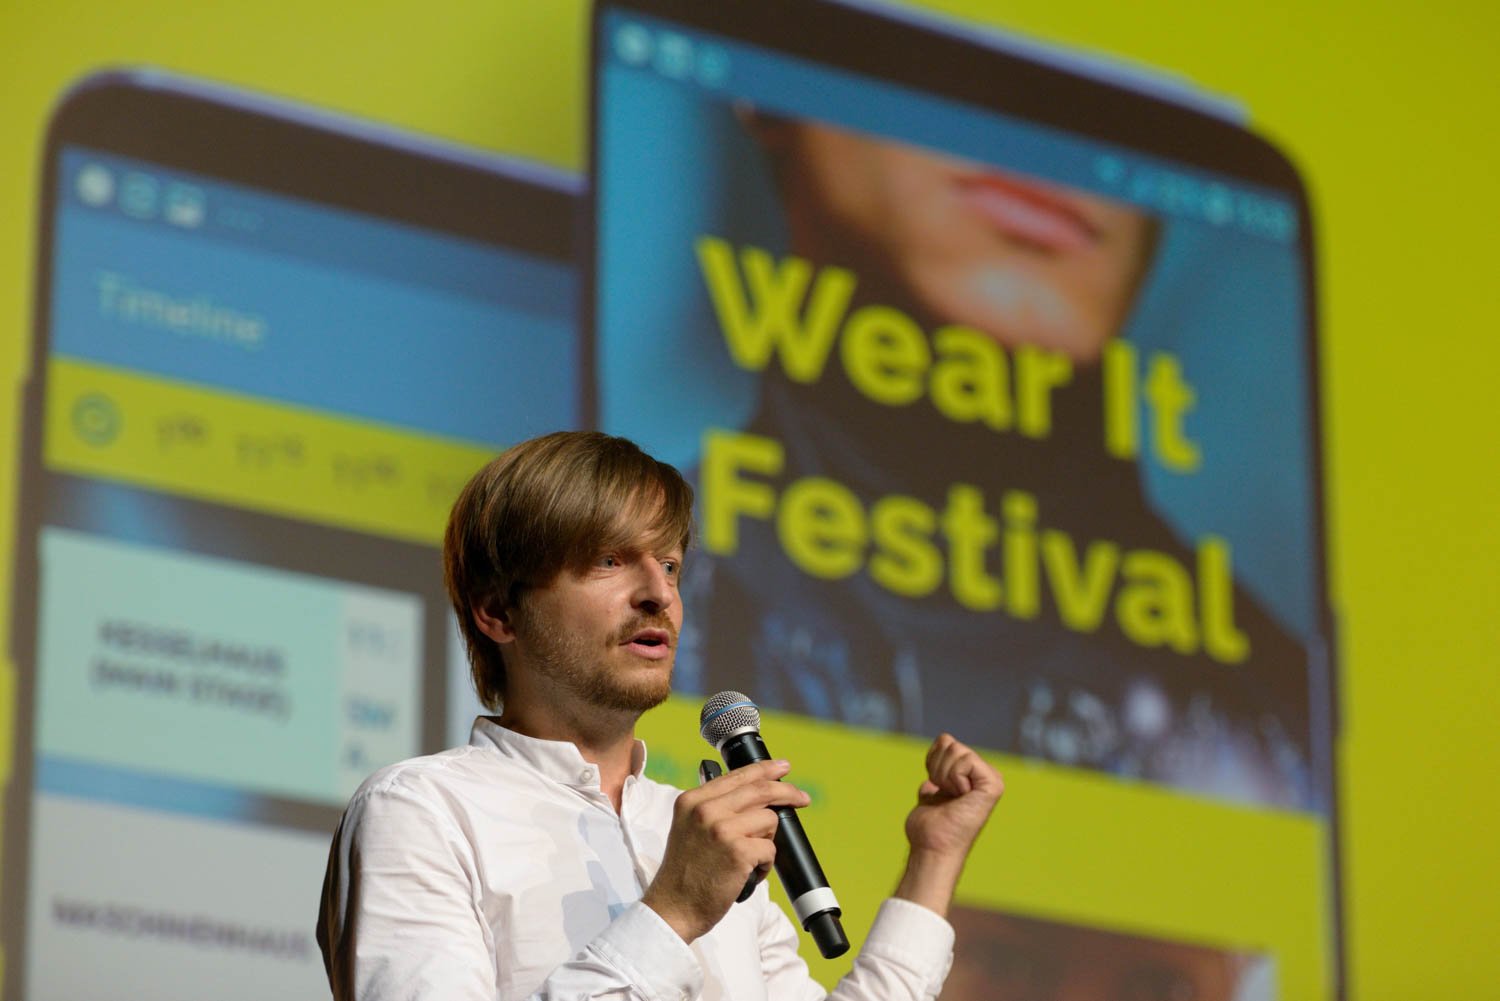 Thomas Gnahm (Wear It, Founder) opening speach at the Wear It Festival - The Conference on Wearables, fashion tech, smart clothing and consumer innovation on 19-20 June 2018 at the Kulturbrauerei Berlin - (c) Wear It Berlin / Michael Wittig, Berlin